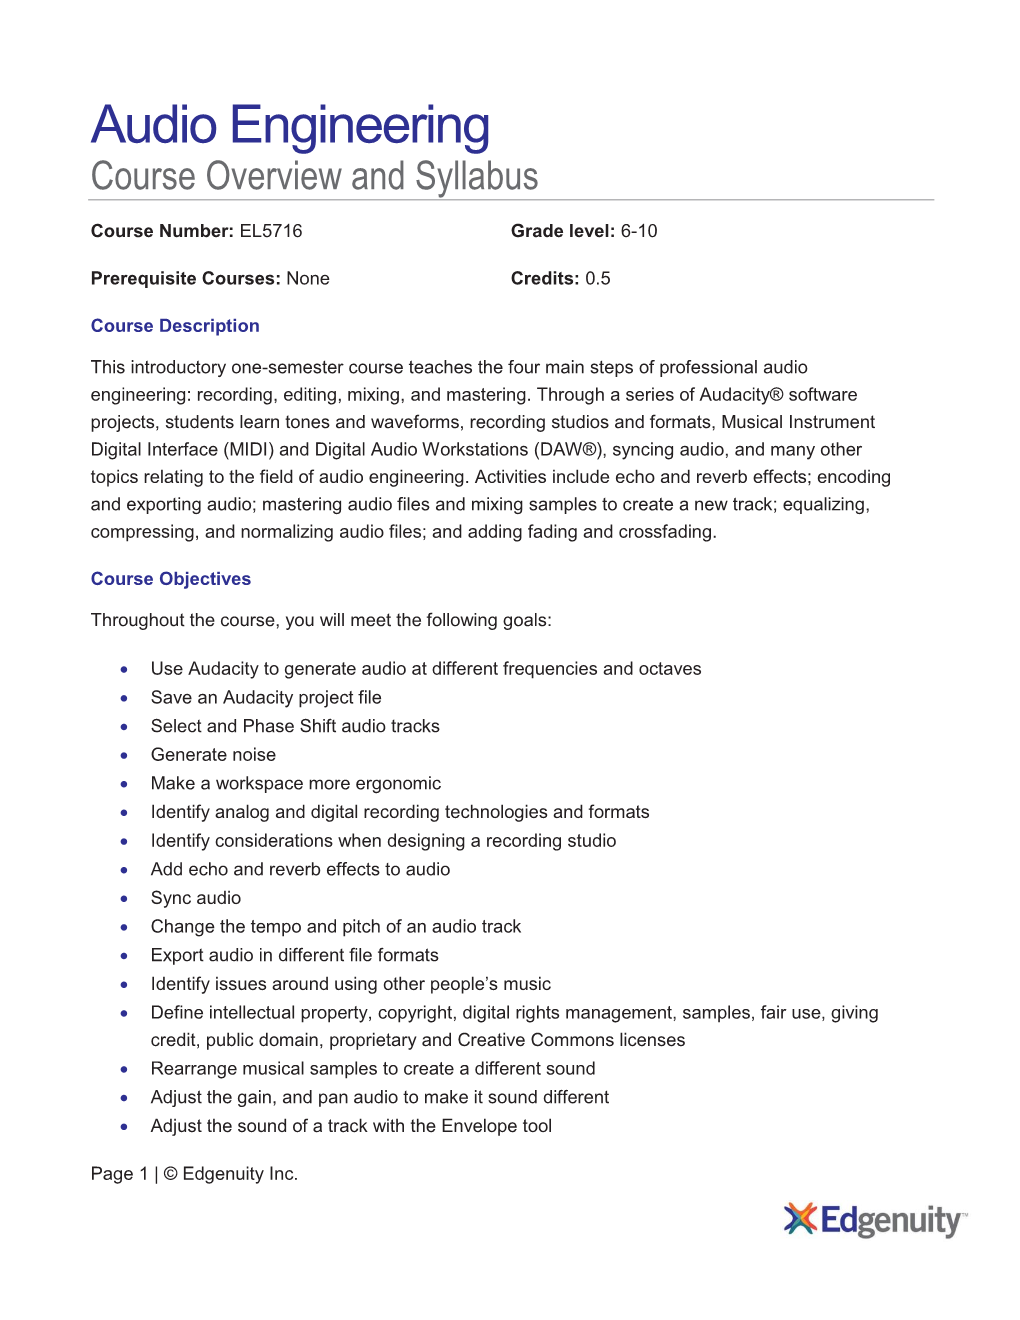 Audio Engineering Course Overview and Syllabus